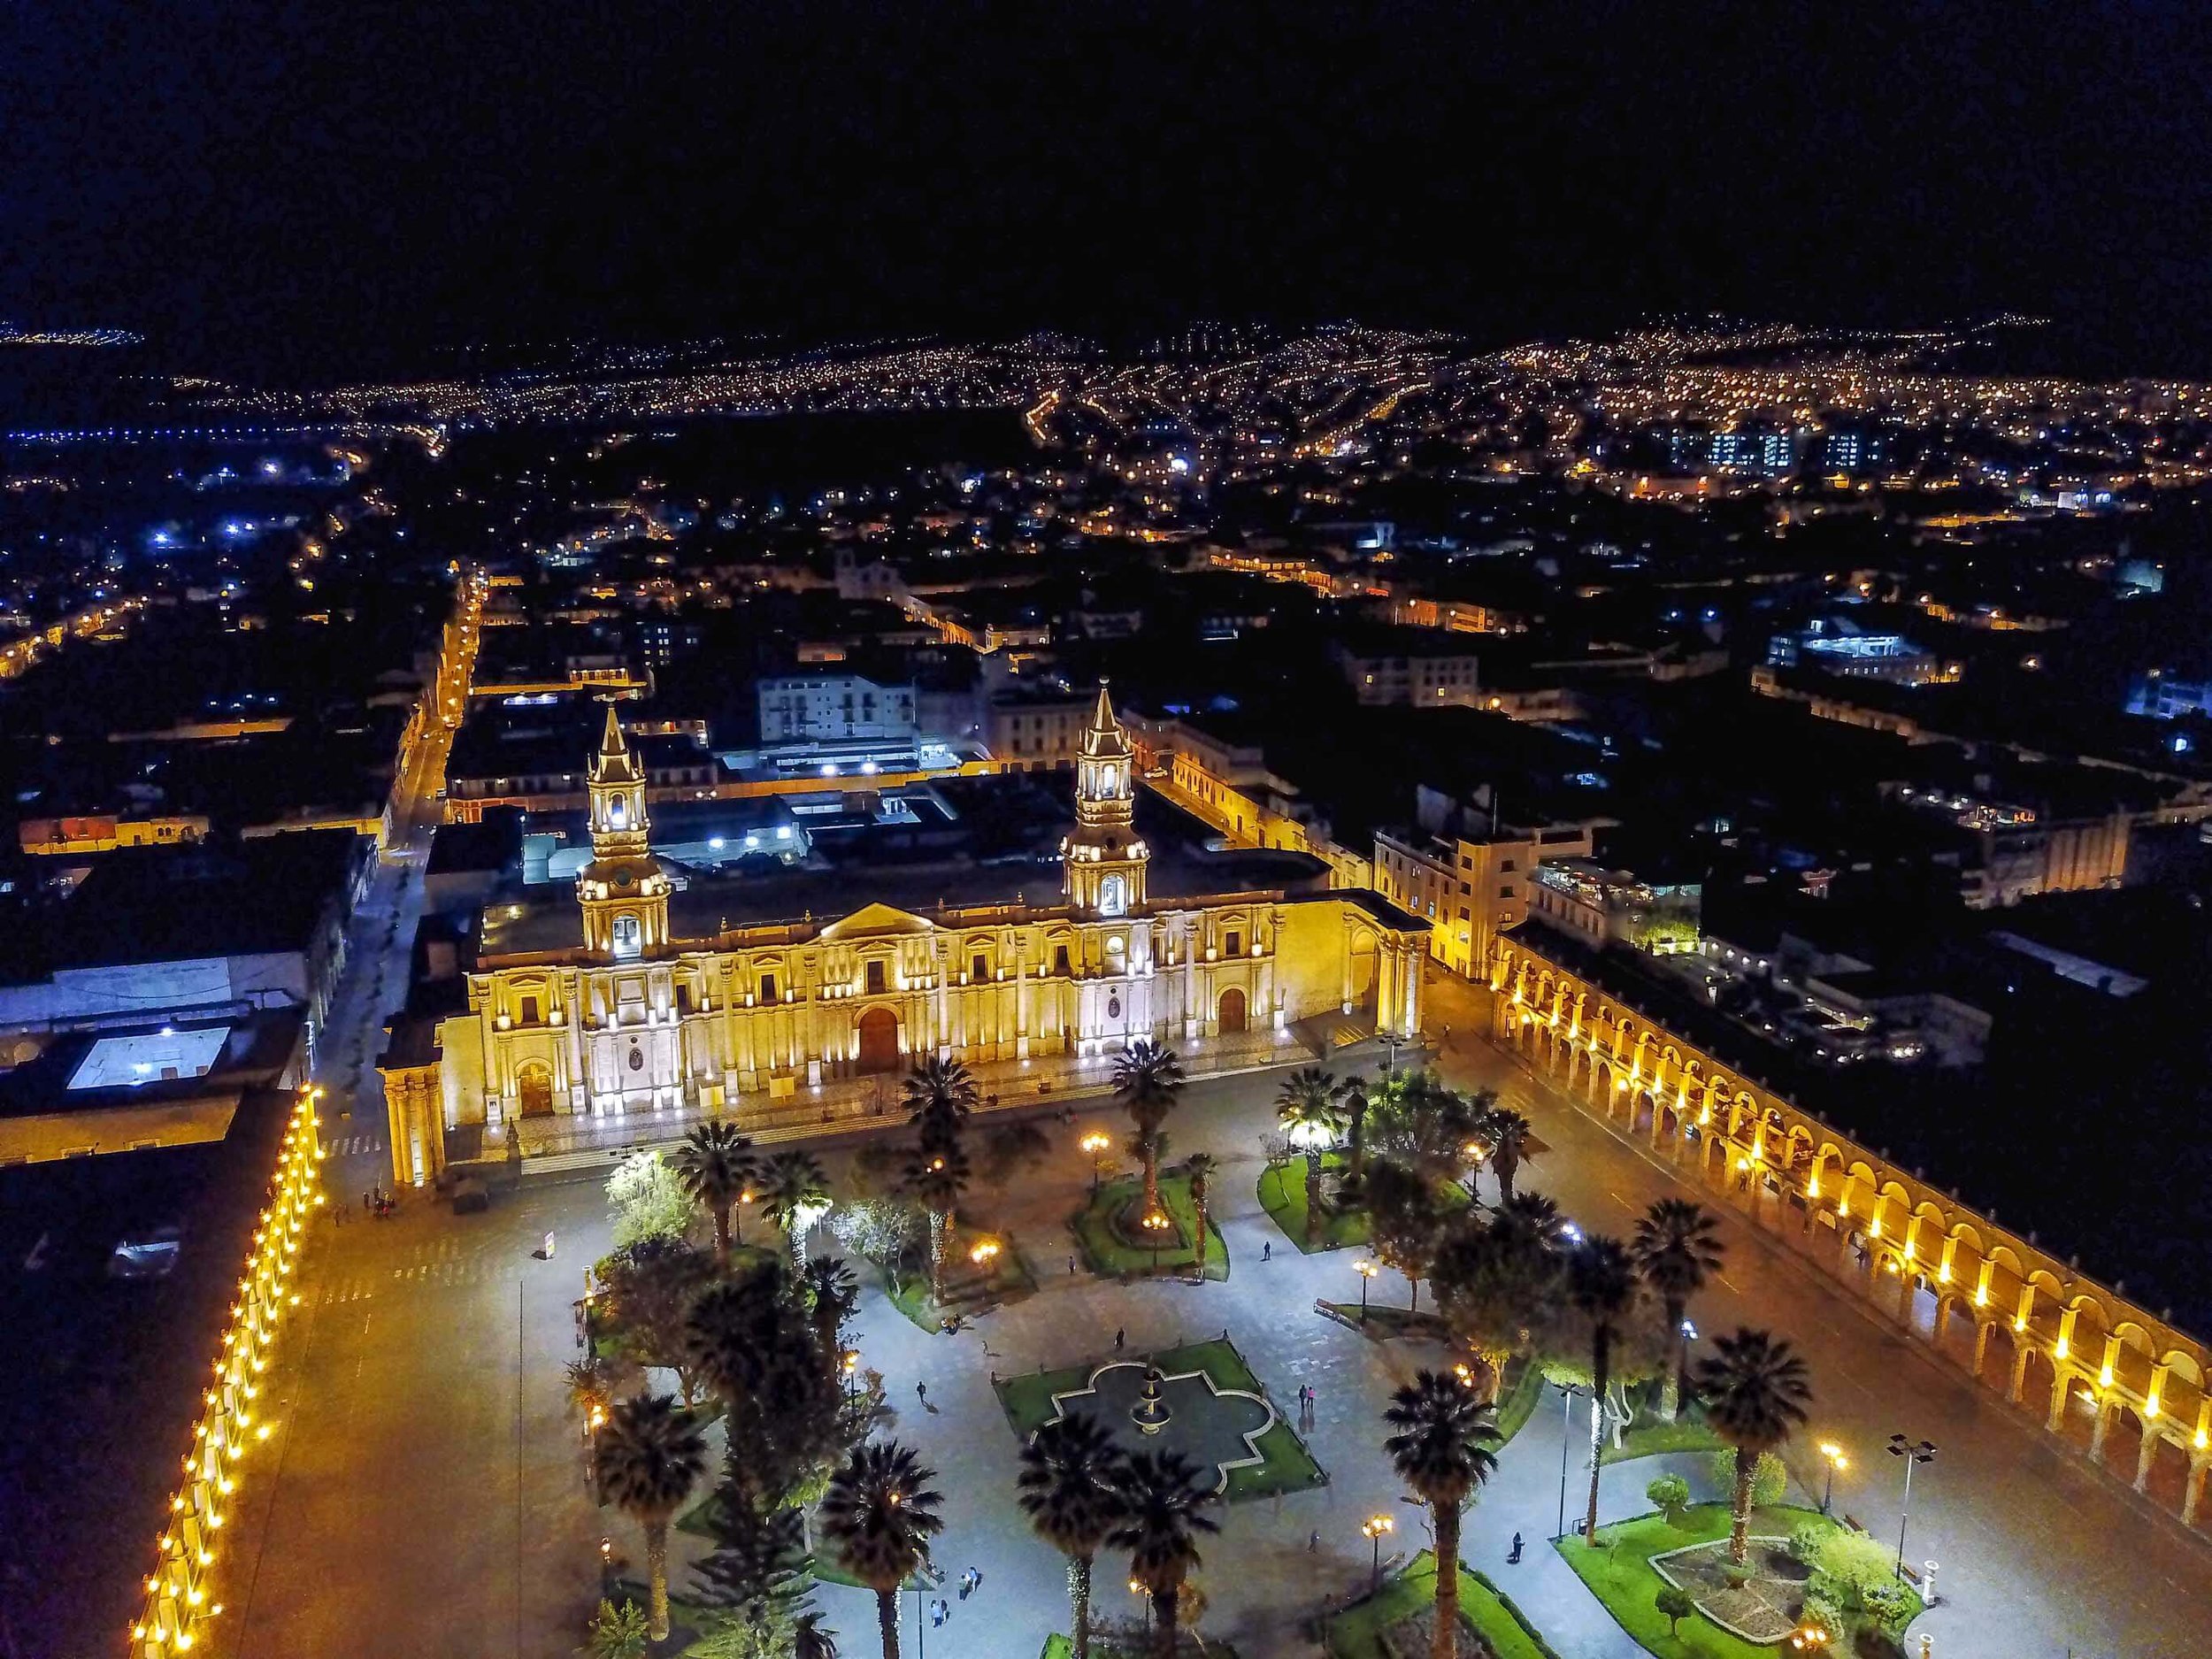 Frequently Asked Questions when visiting Arequipa